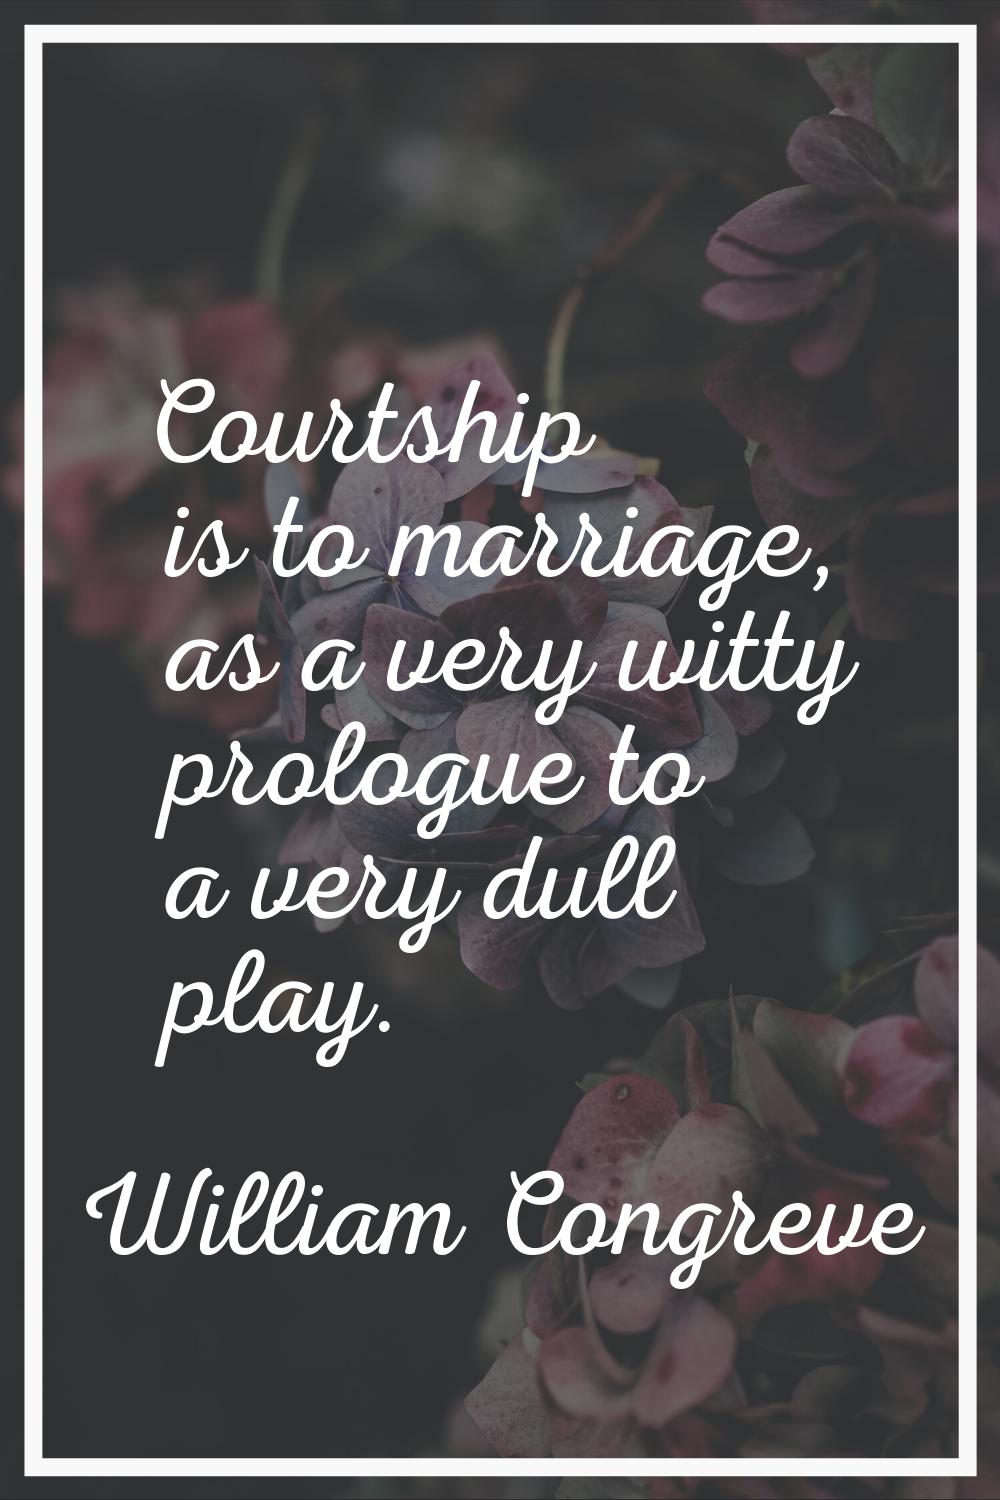 Courtship is to marriage, as a very witty prologue to a very dull play.